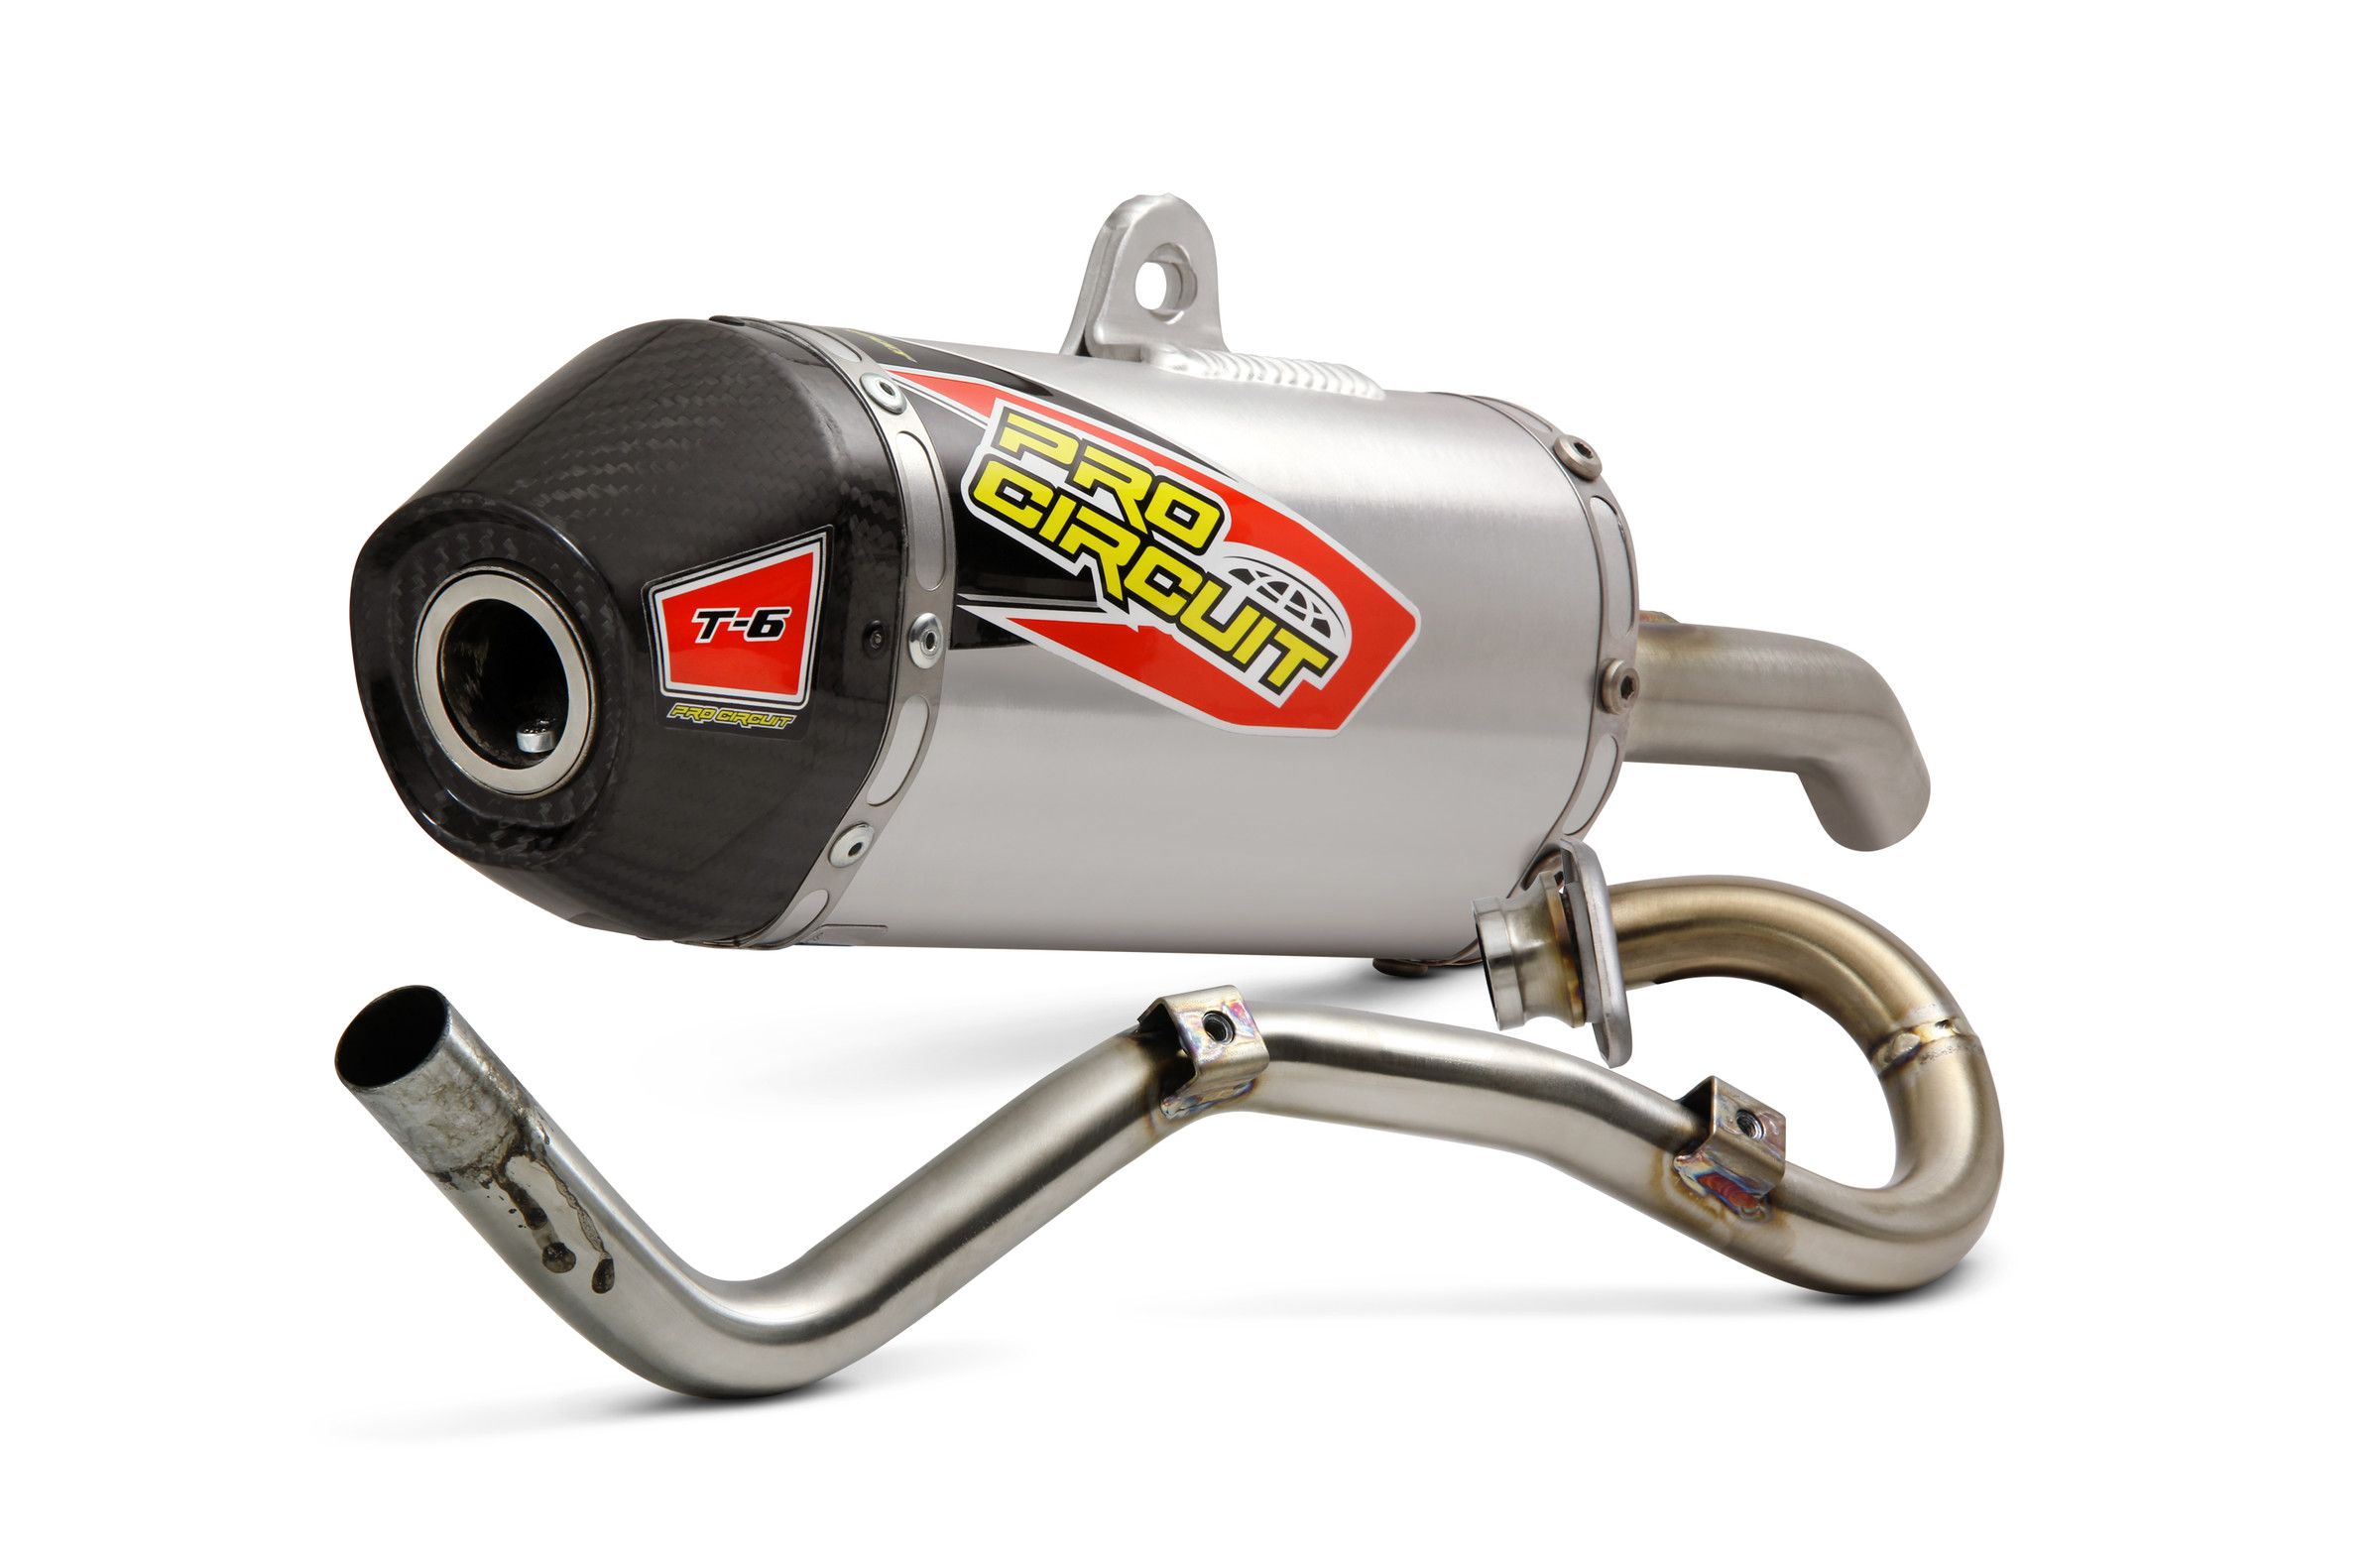 Pro Circuit Announces 2019 CRF Off-Road Exhaust Systems Will Be